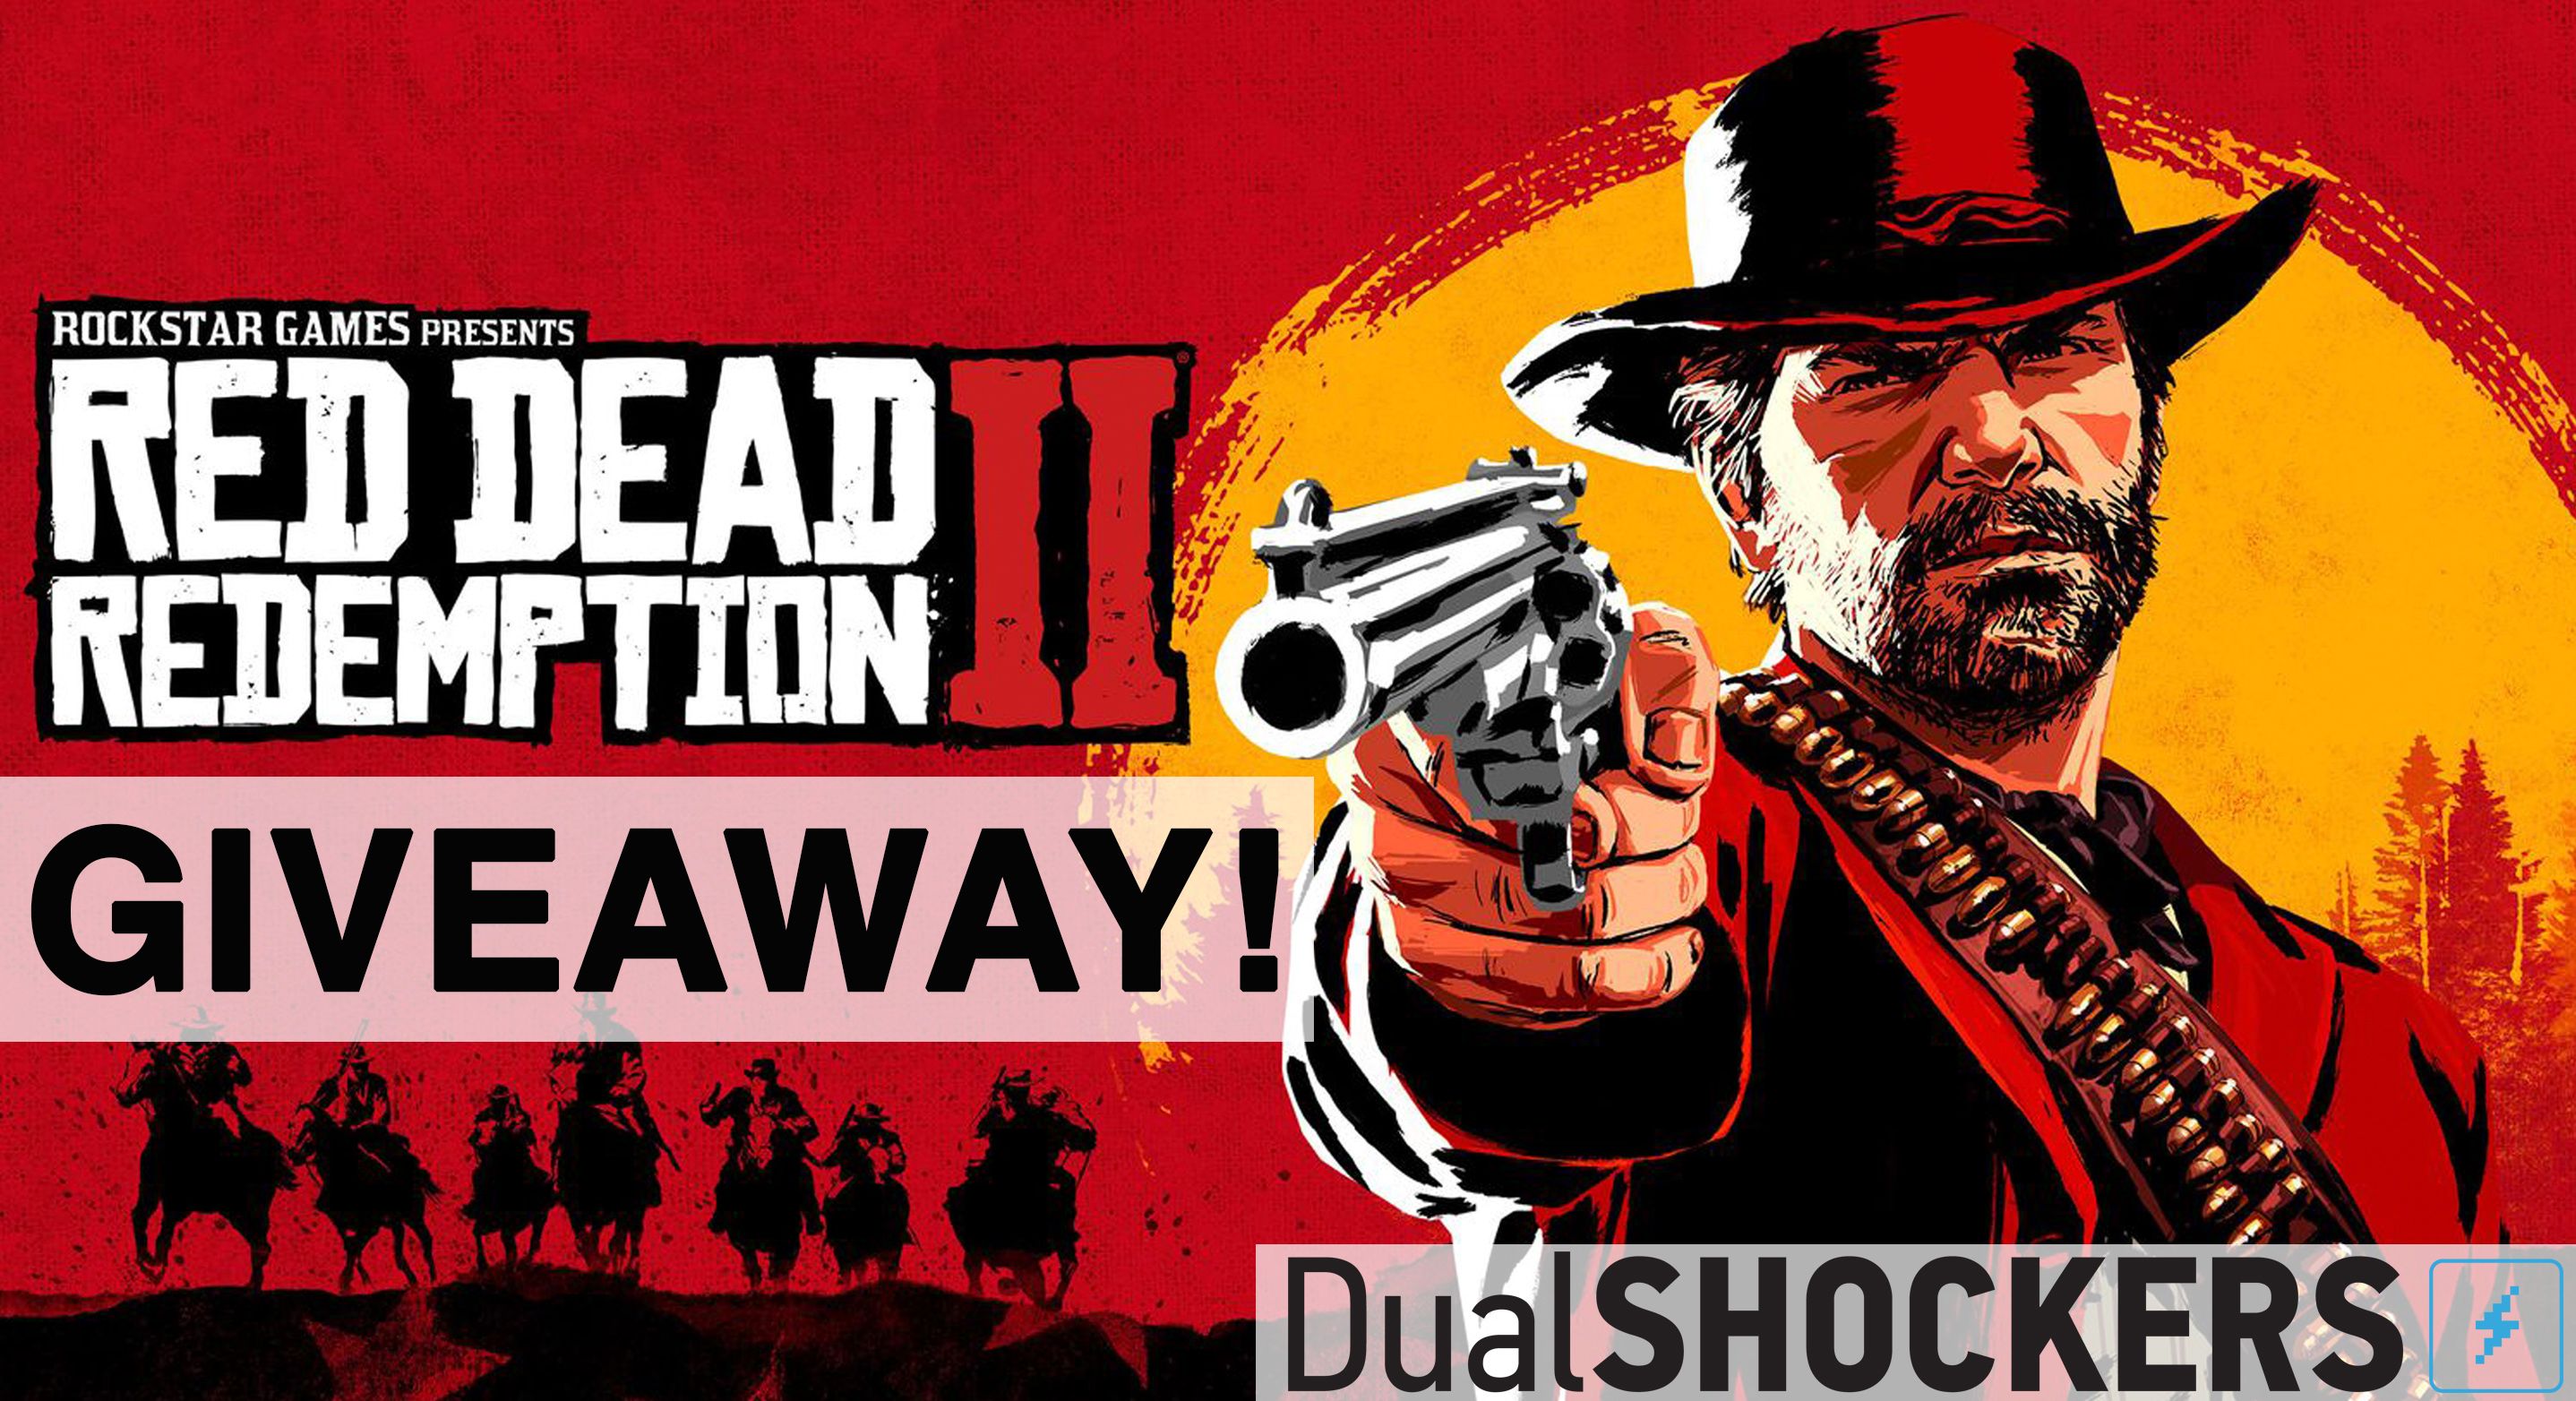 Red Dead Redemption 2 Giveaway: Win One of Five Copies from DualShockers